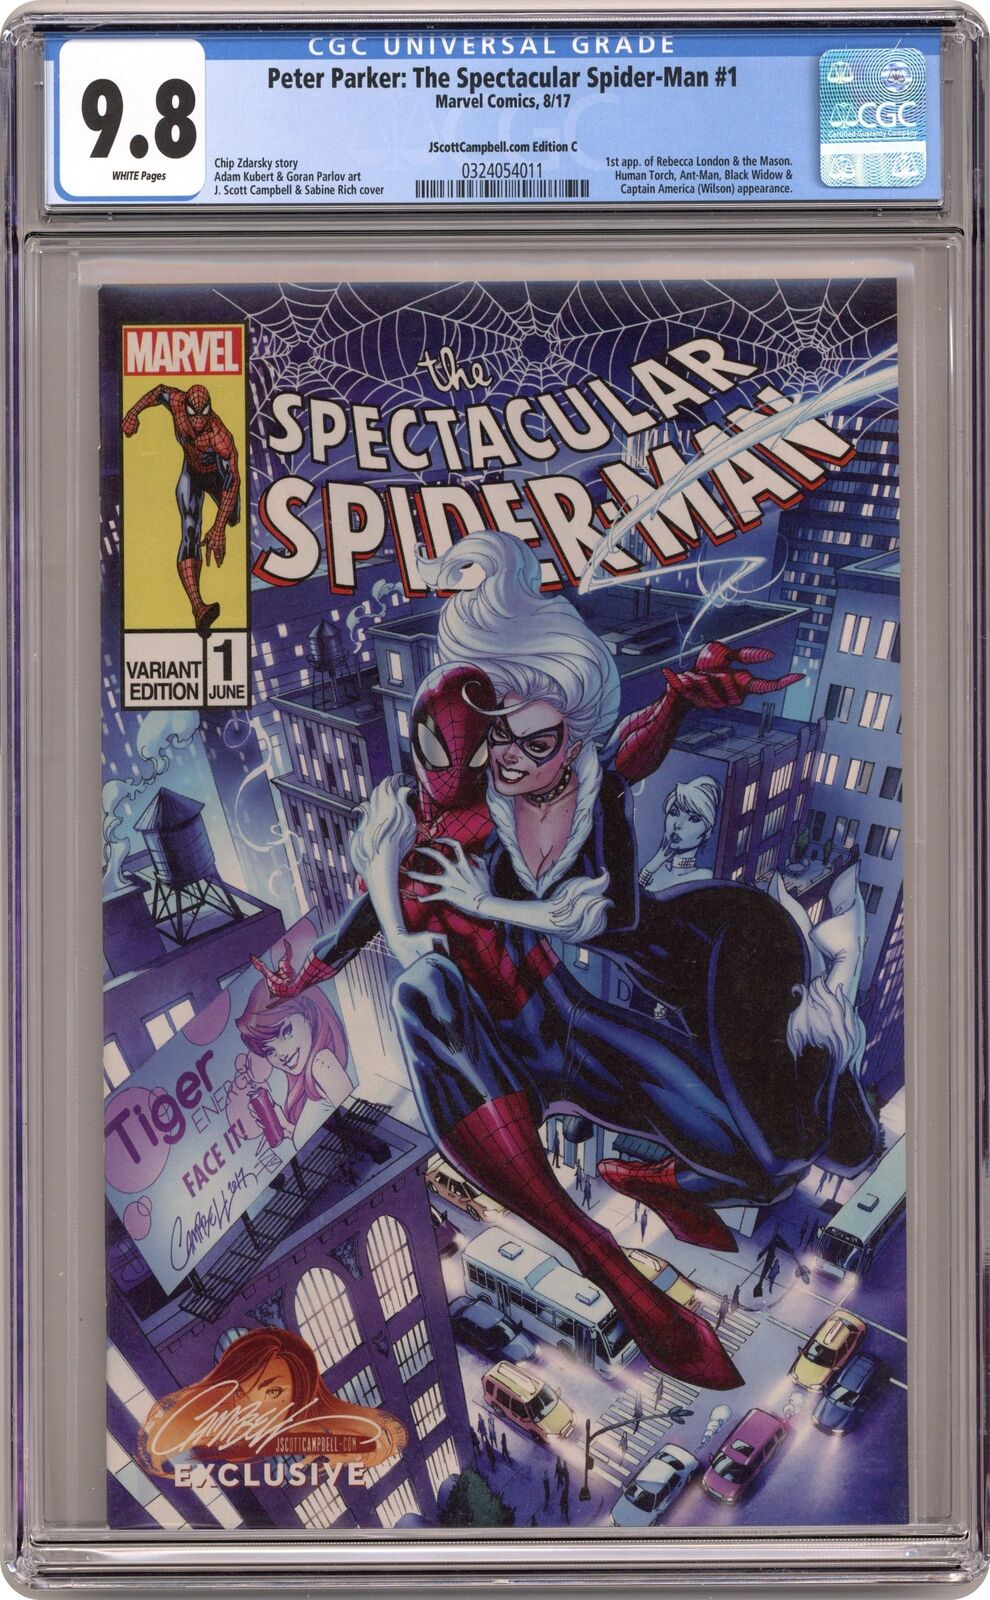 Peter Parker Spectacular Spider-Man #1 Campbell Cover C CGC 9.8 2017 0324054011